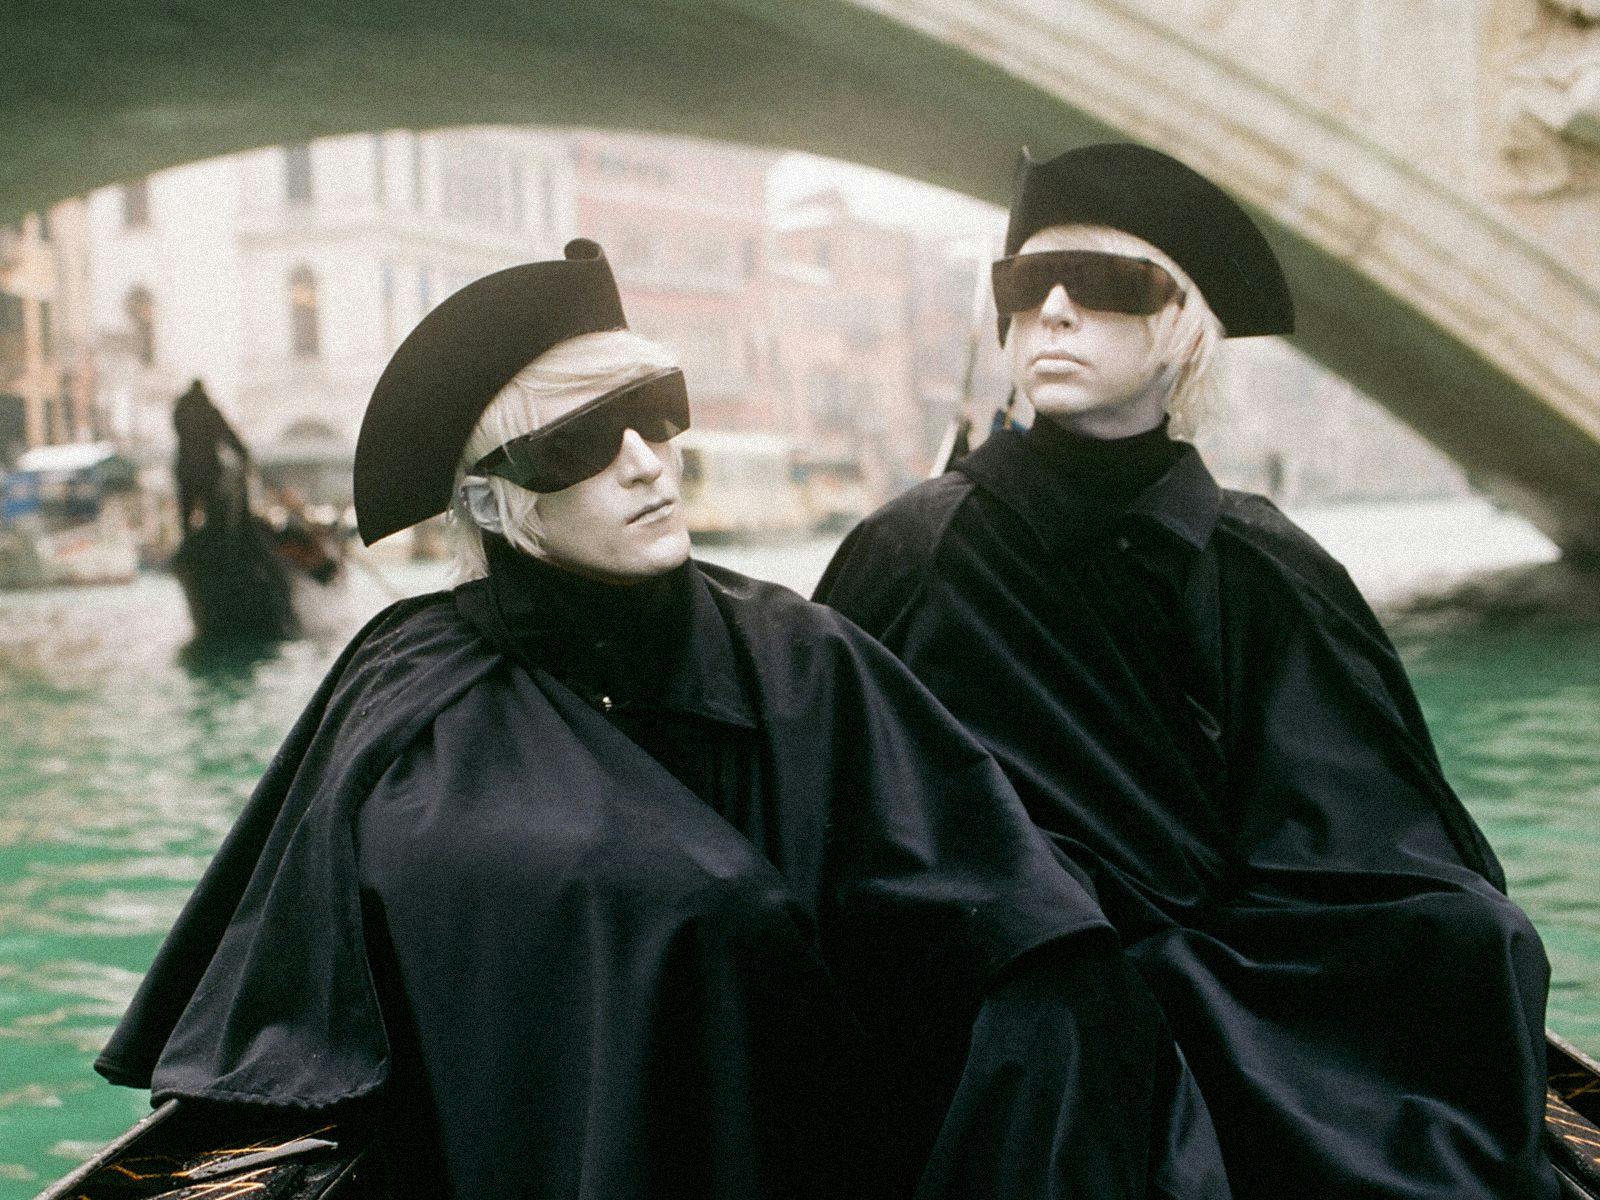 Members of Drab Majesty sit in a canal boat, wearing all black outfits, hats and sunglasses.